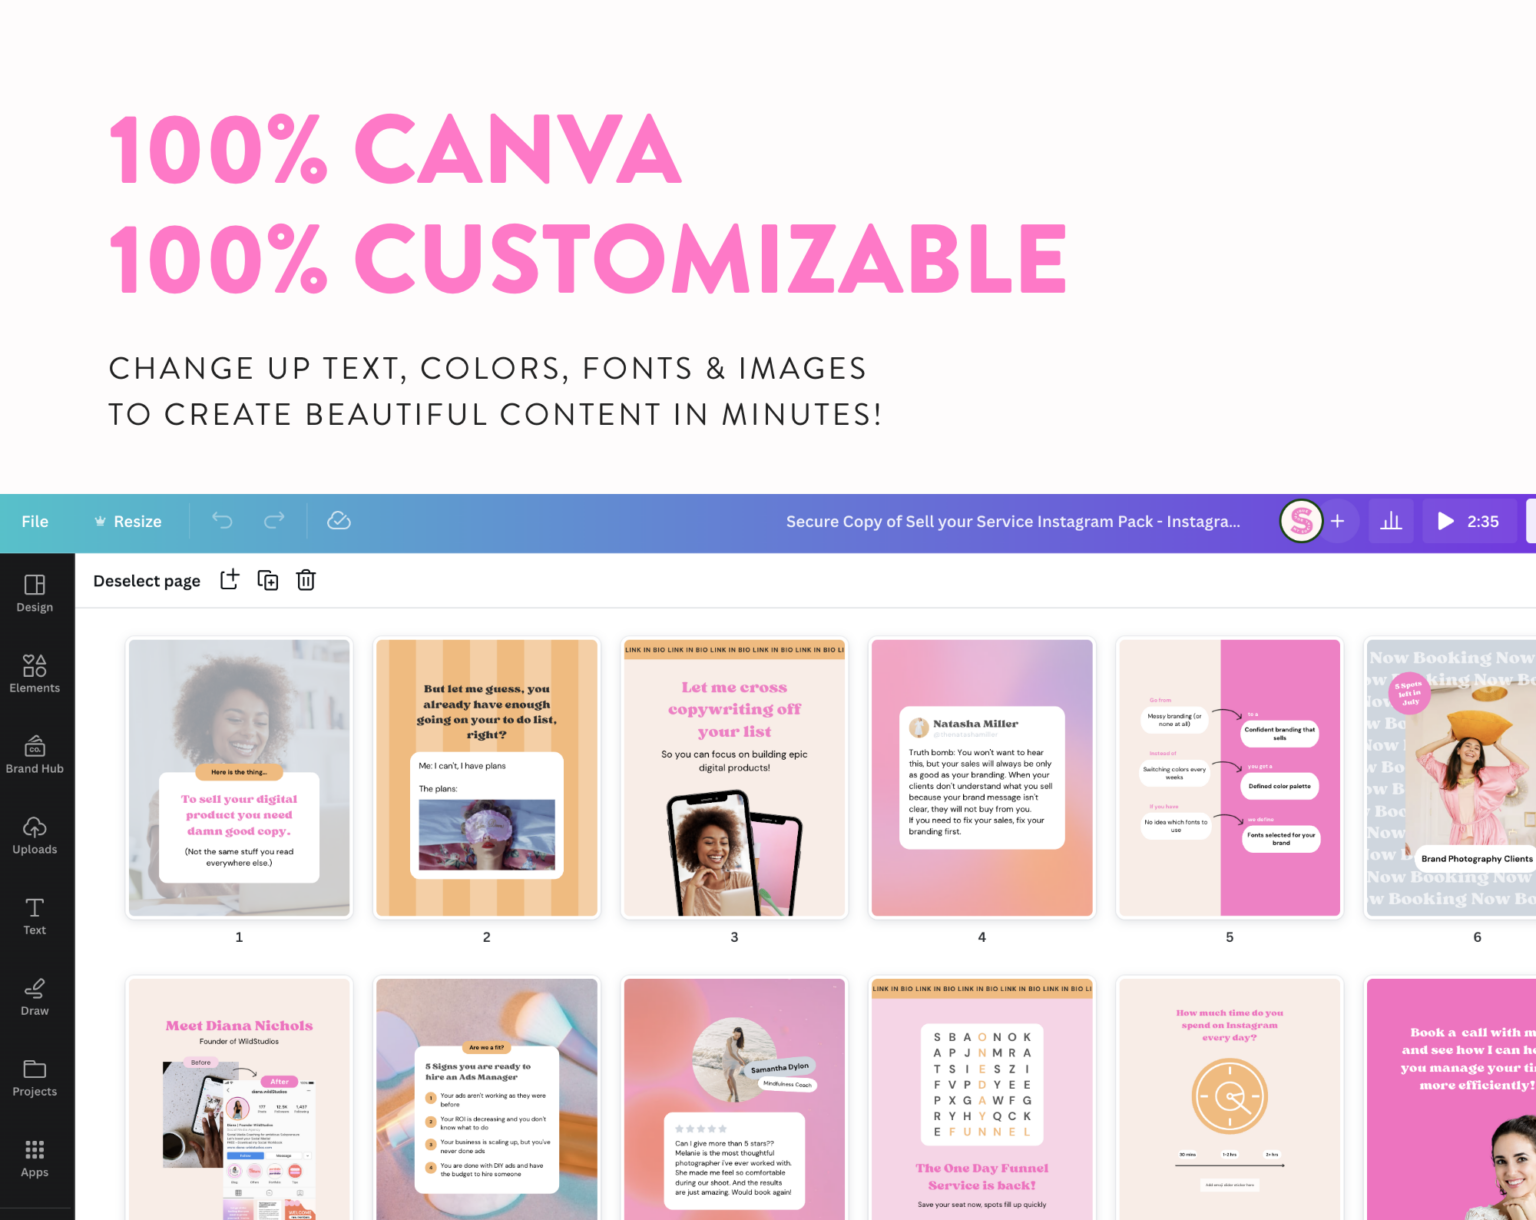 Sell-your-service-instagram-pack-for-canva-screenshot-5